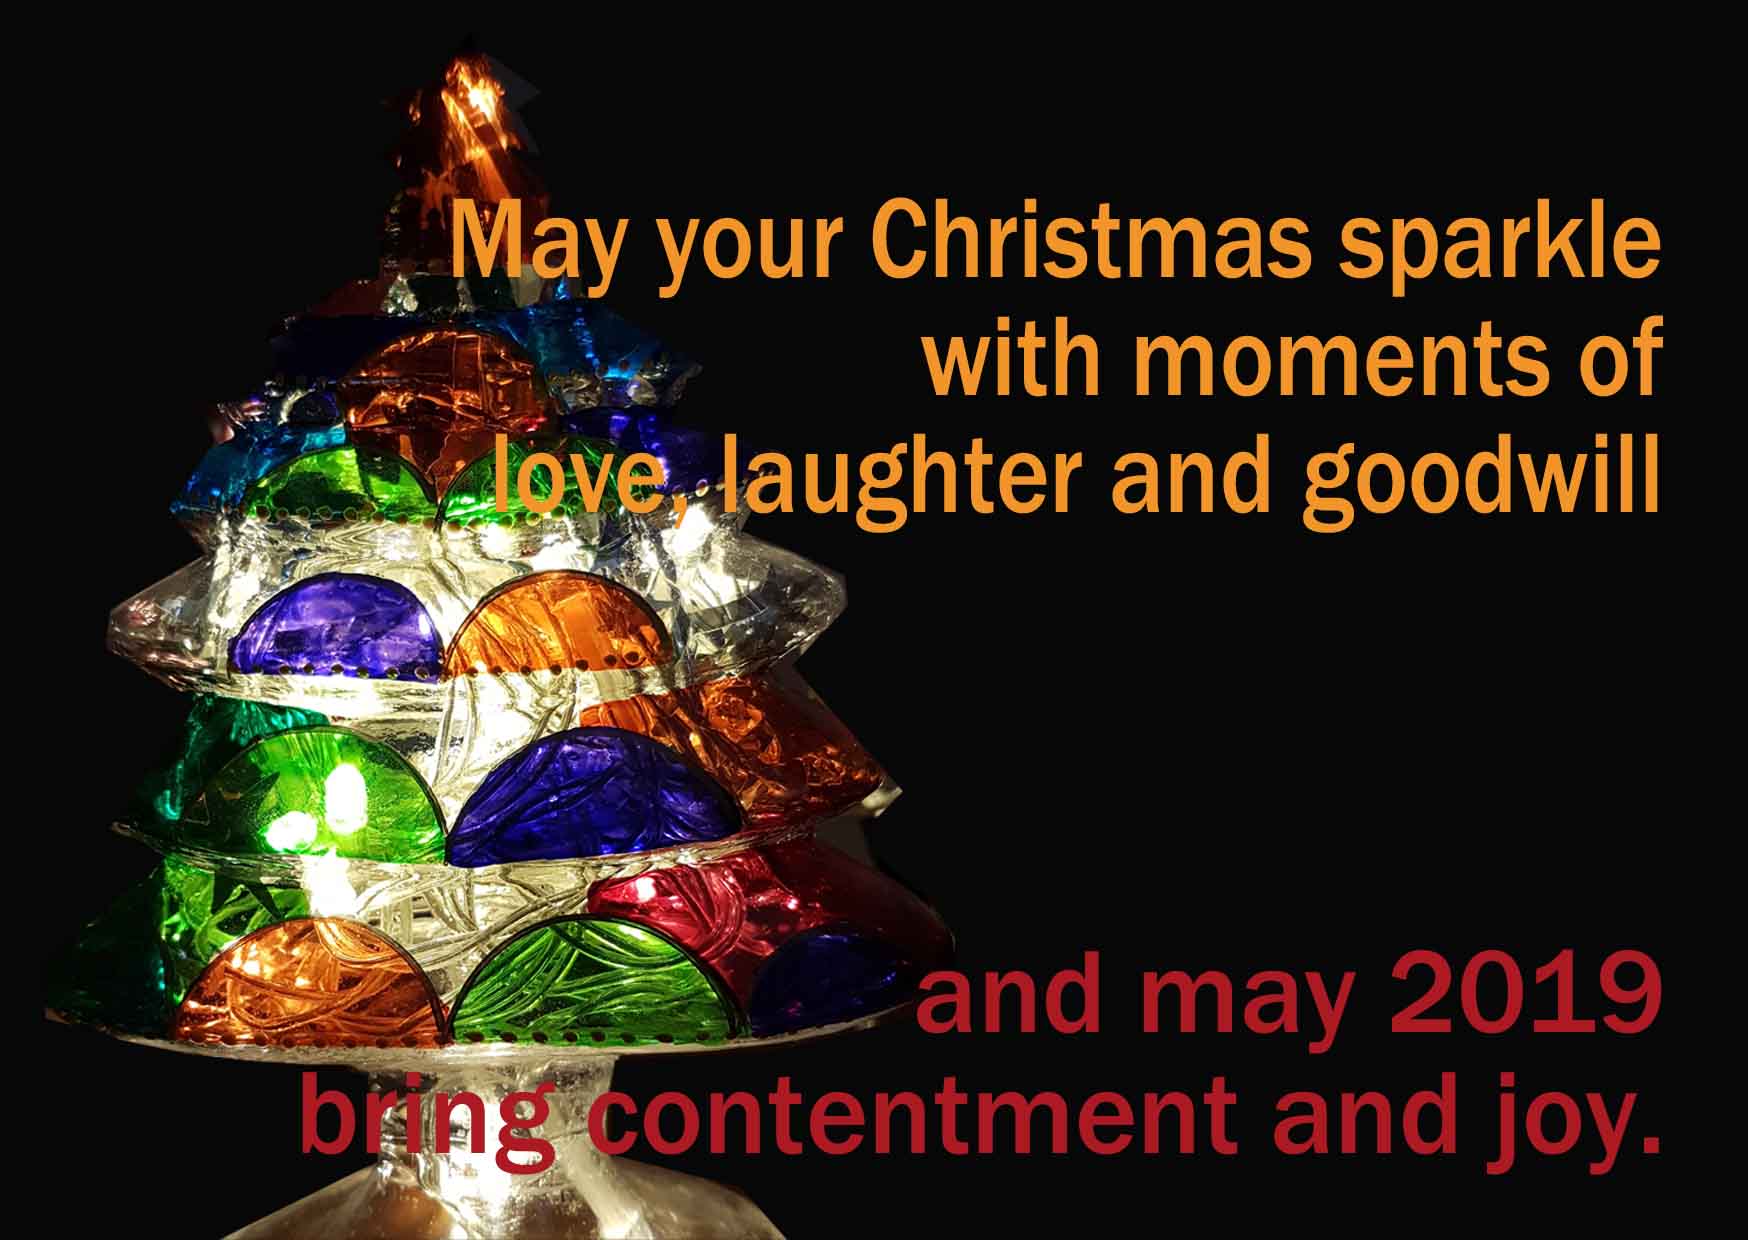 May your Christmas sparkle with moments of love, laughter and goodwill